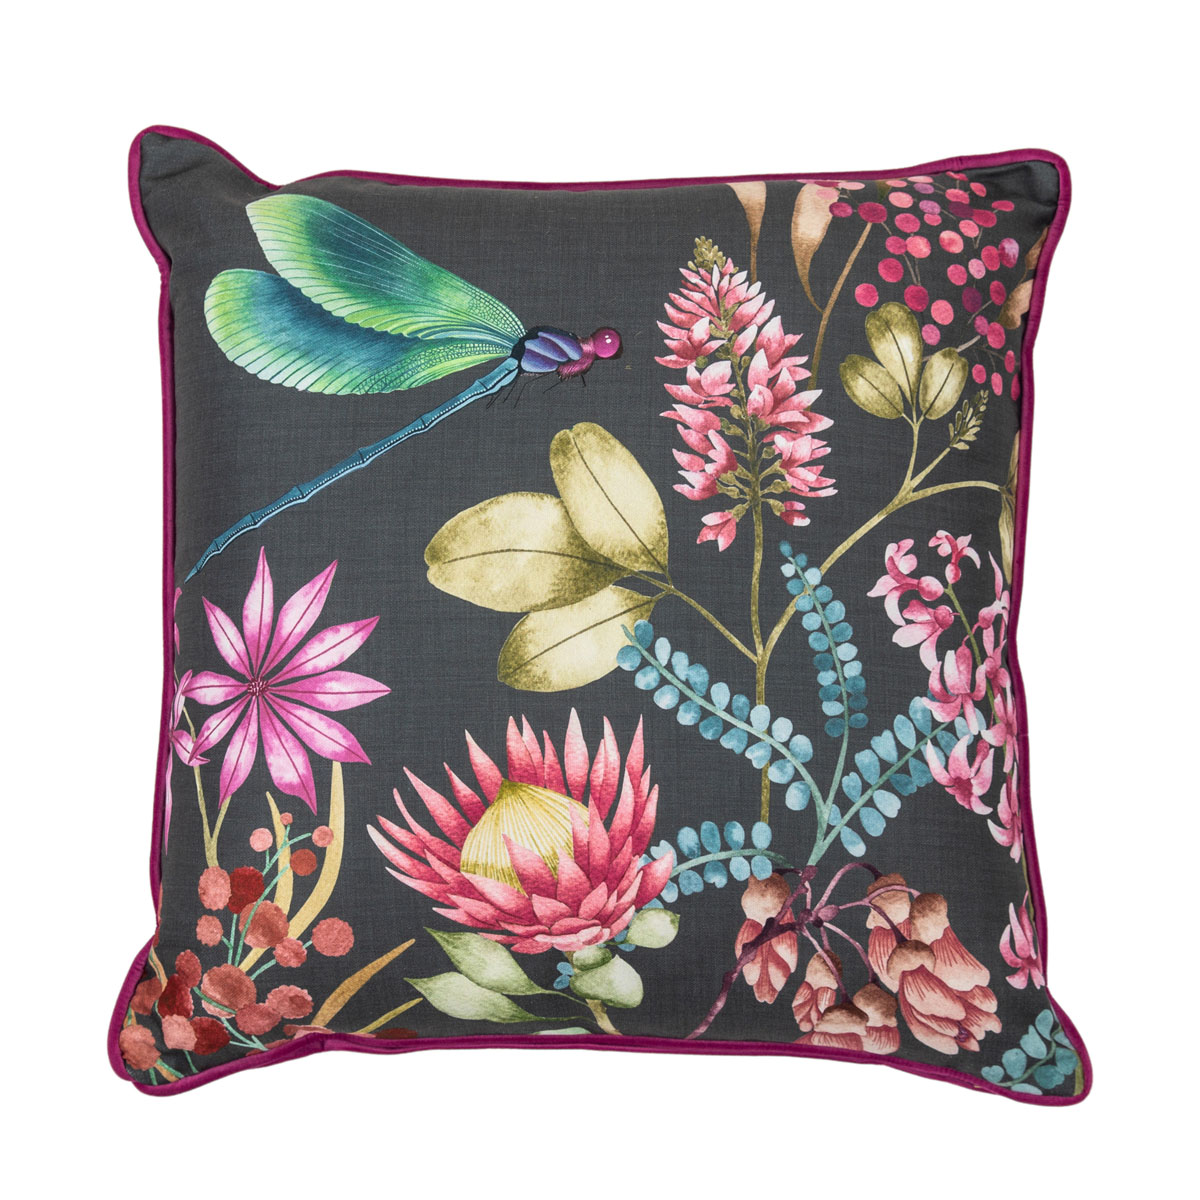 Heritage Dragonfly Scene Cushion Teal 550x550mm